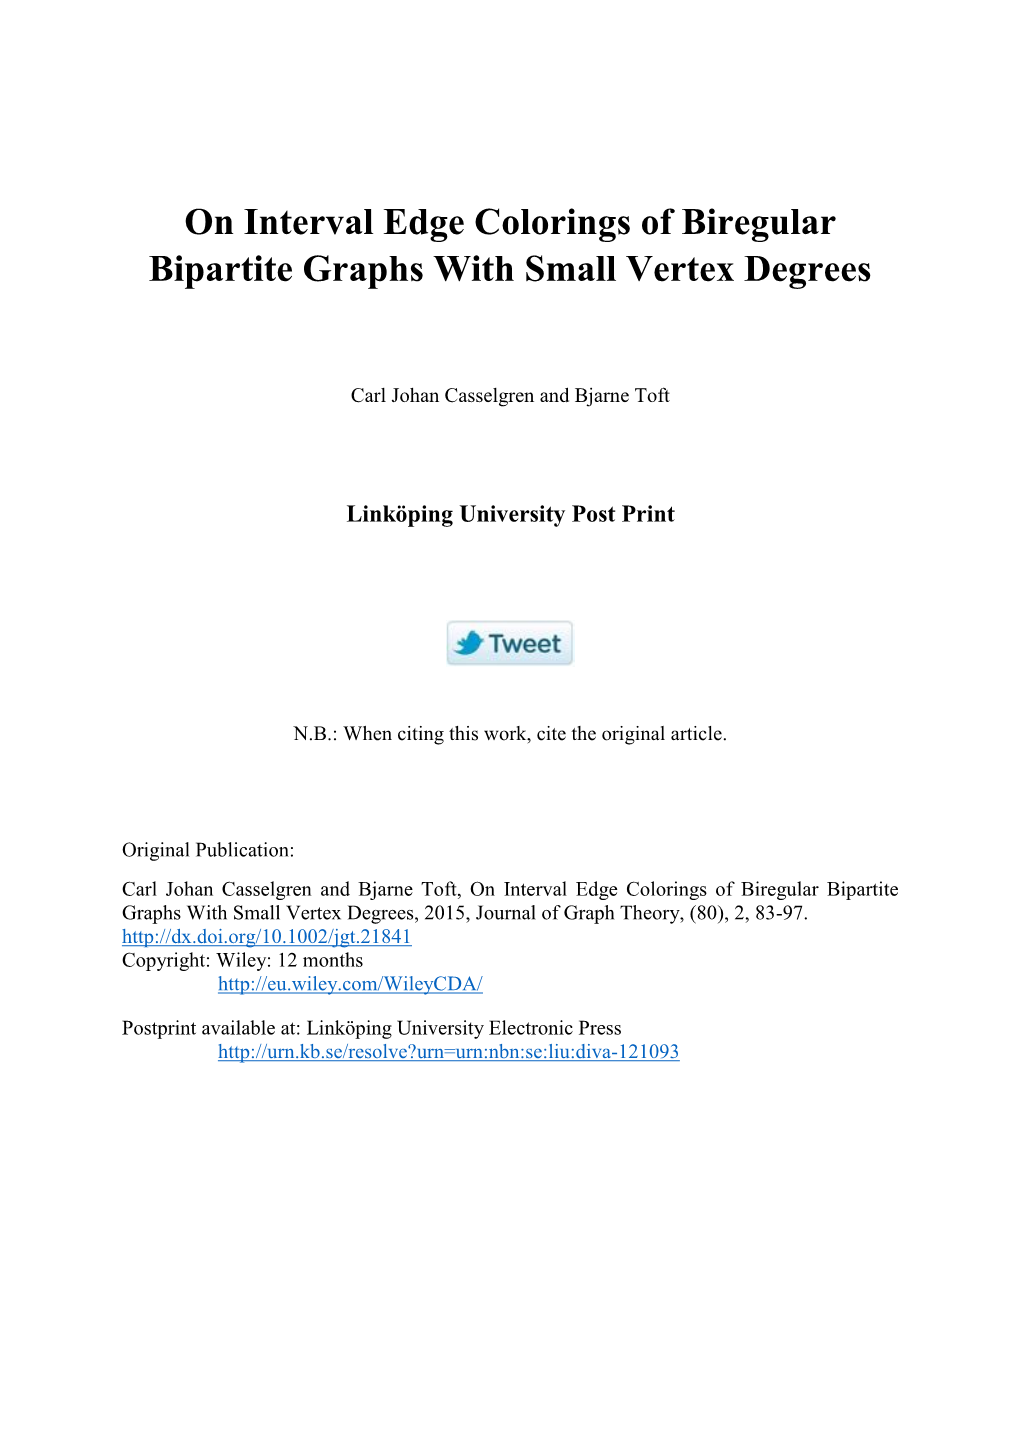 On Interval Edge Colorings of Biregular Bipartite Graphs with Small Vertex Degrees